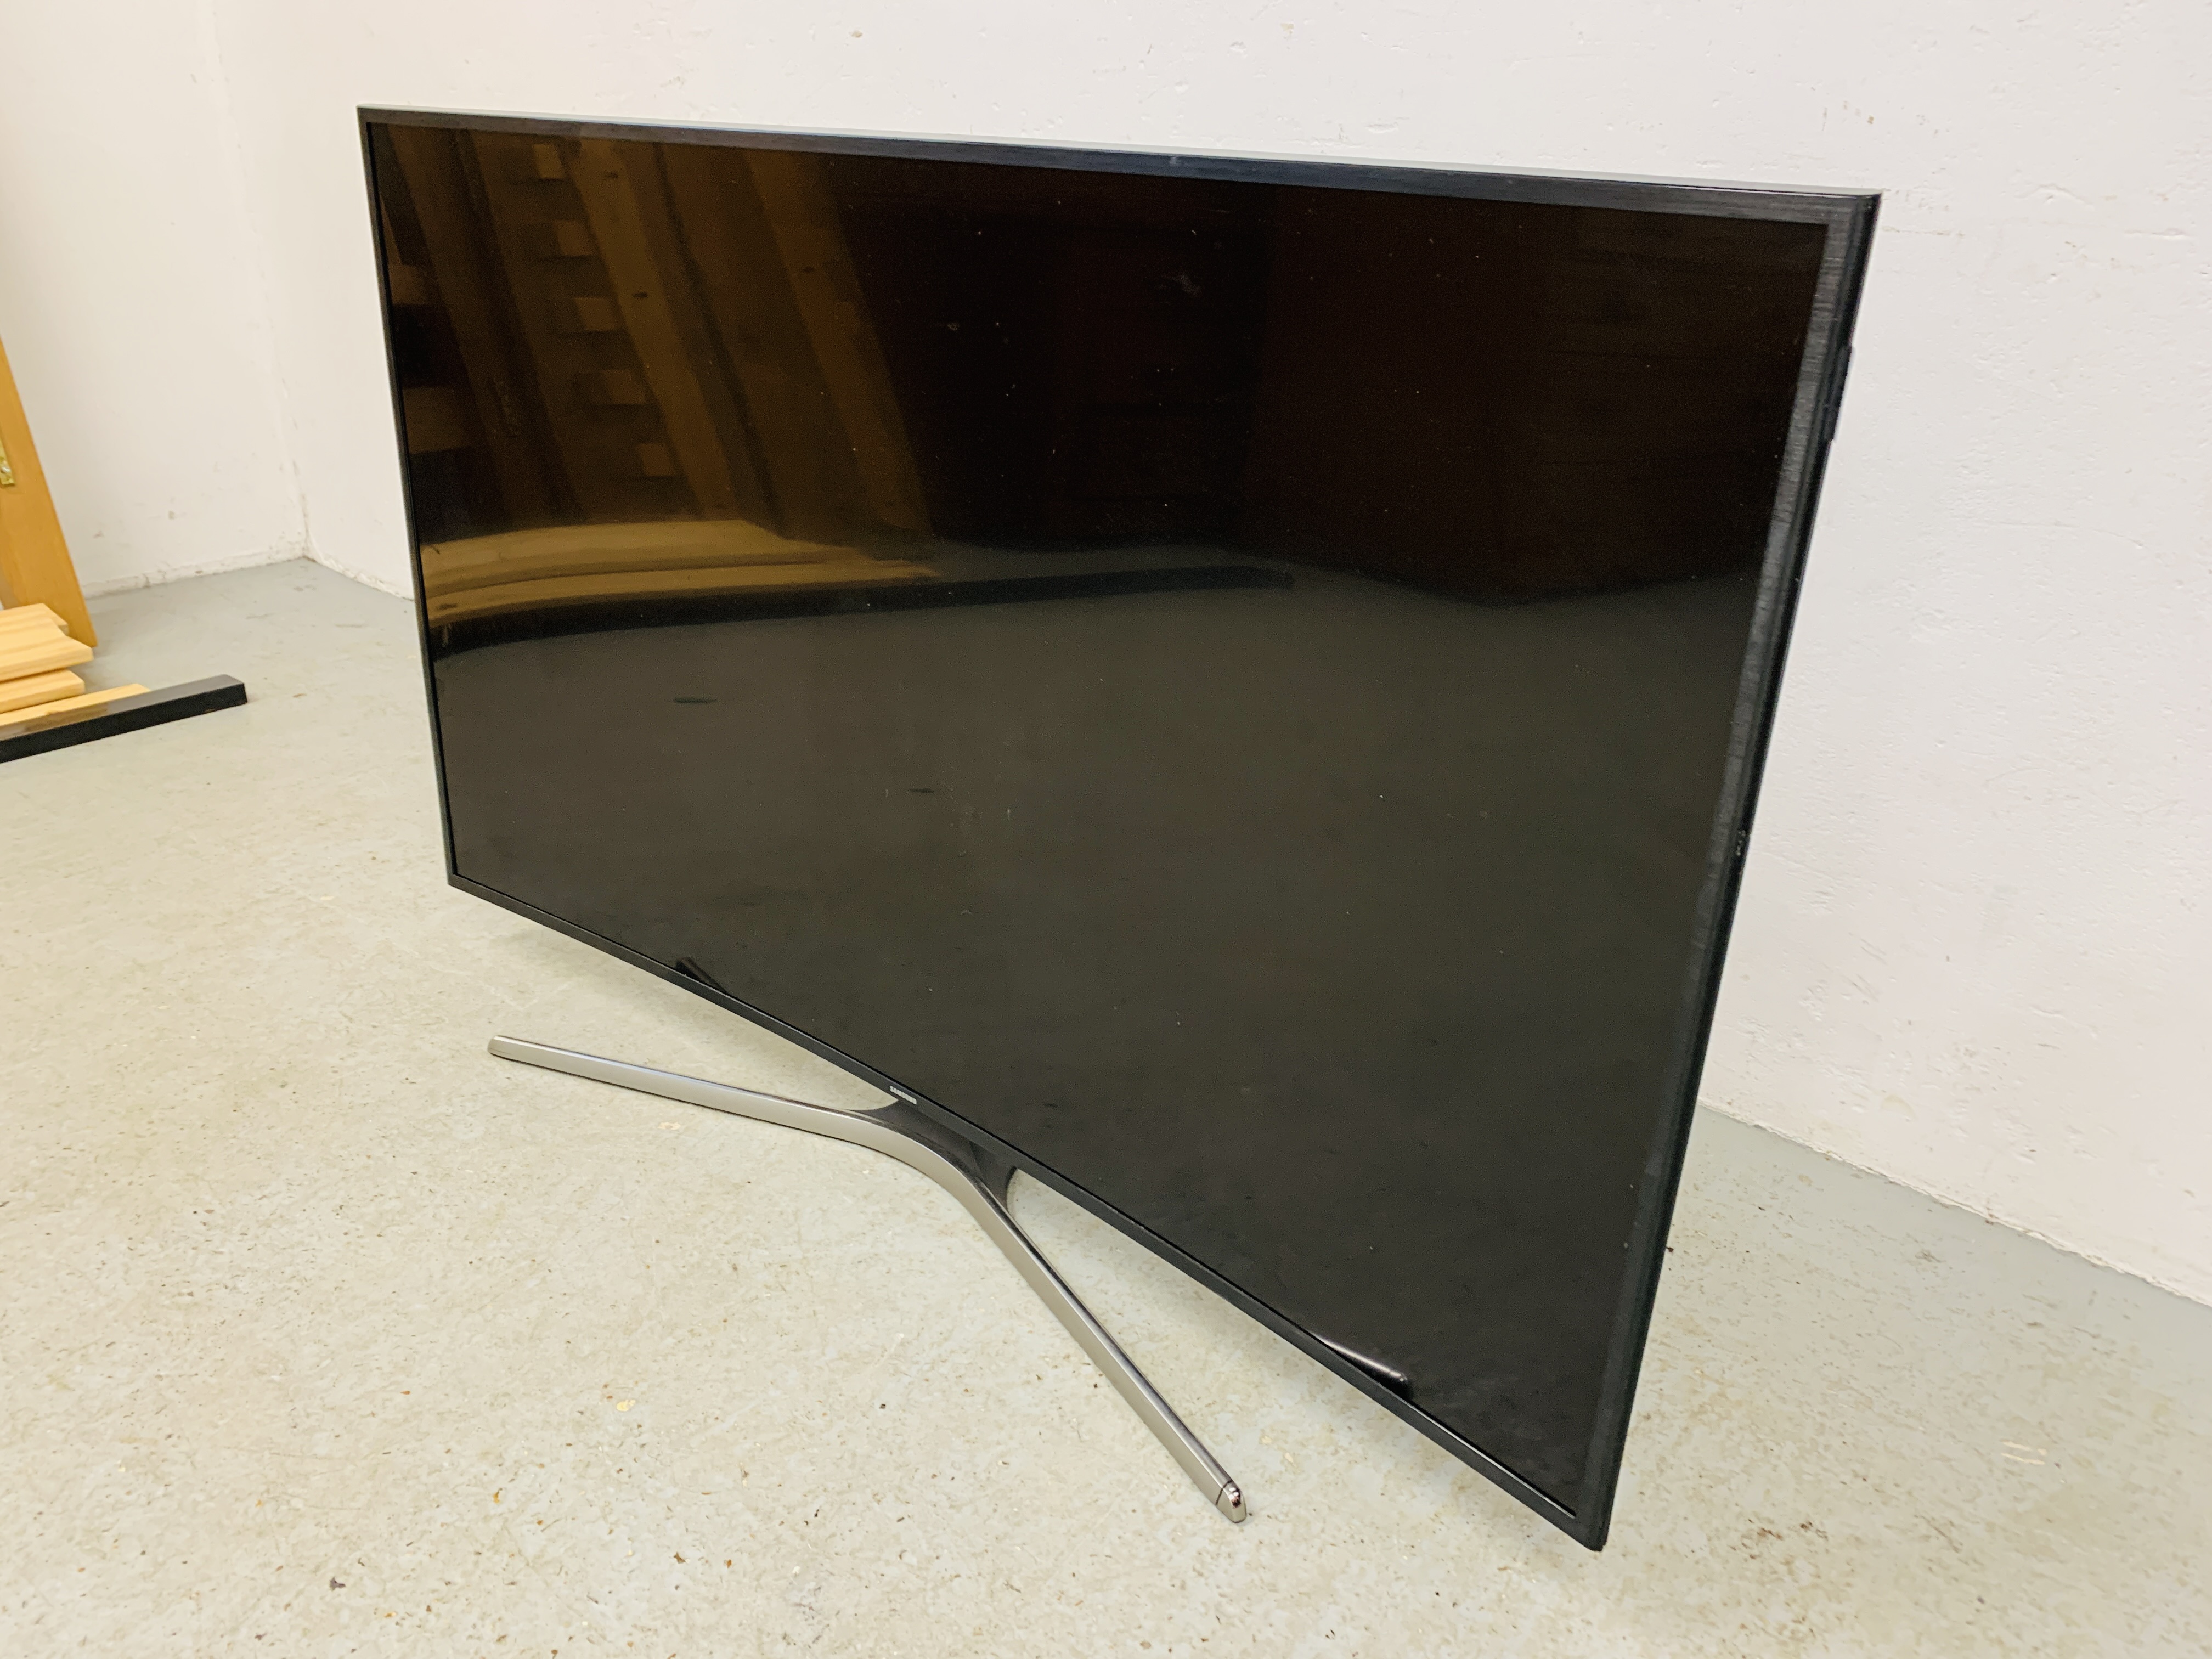 A SAMSUNG 55 INCH CURVED SCREEN SMART TV WITH REMOTE - SOLD AS SEEN - Image 3 of 4